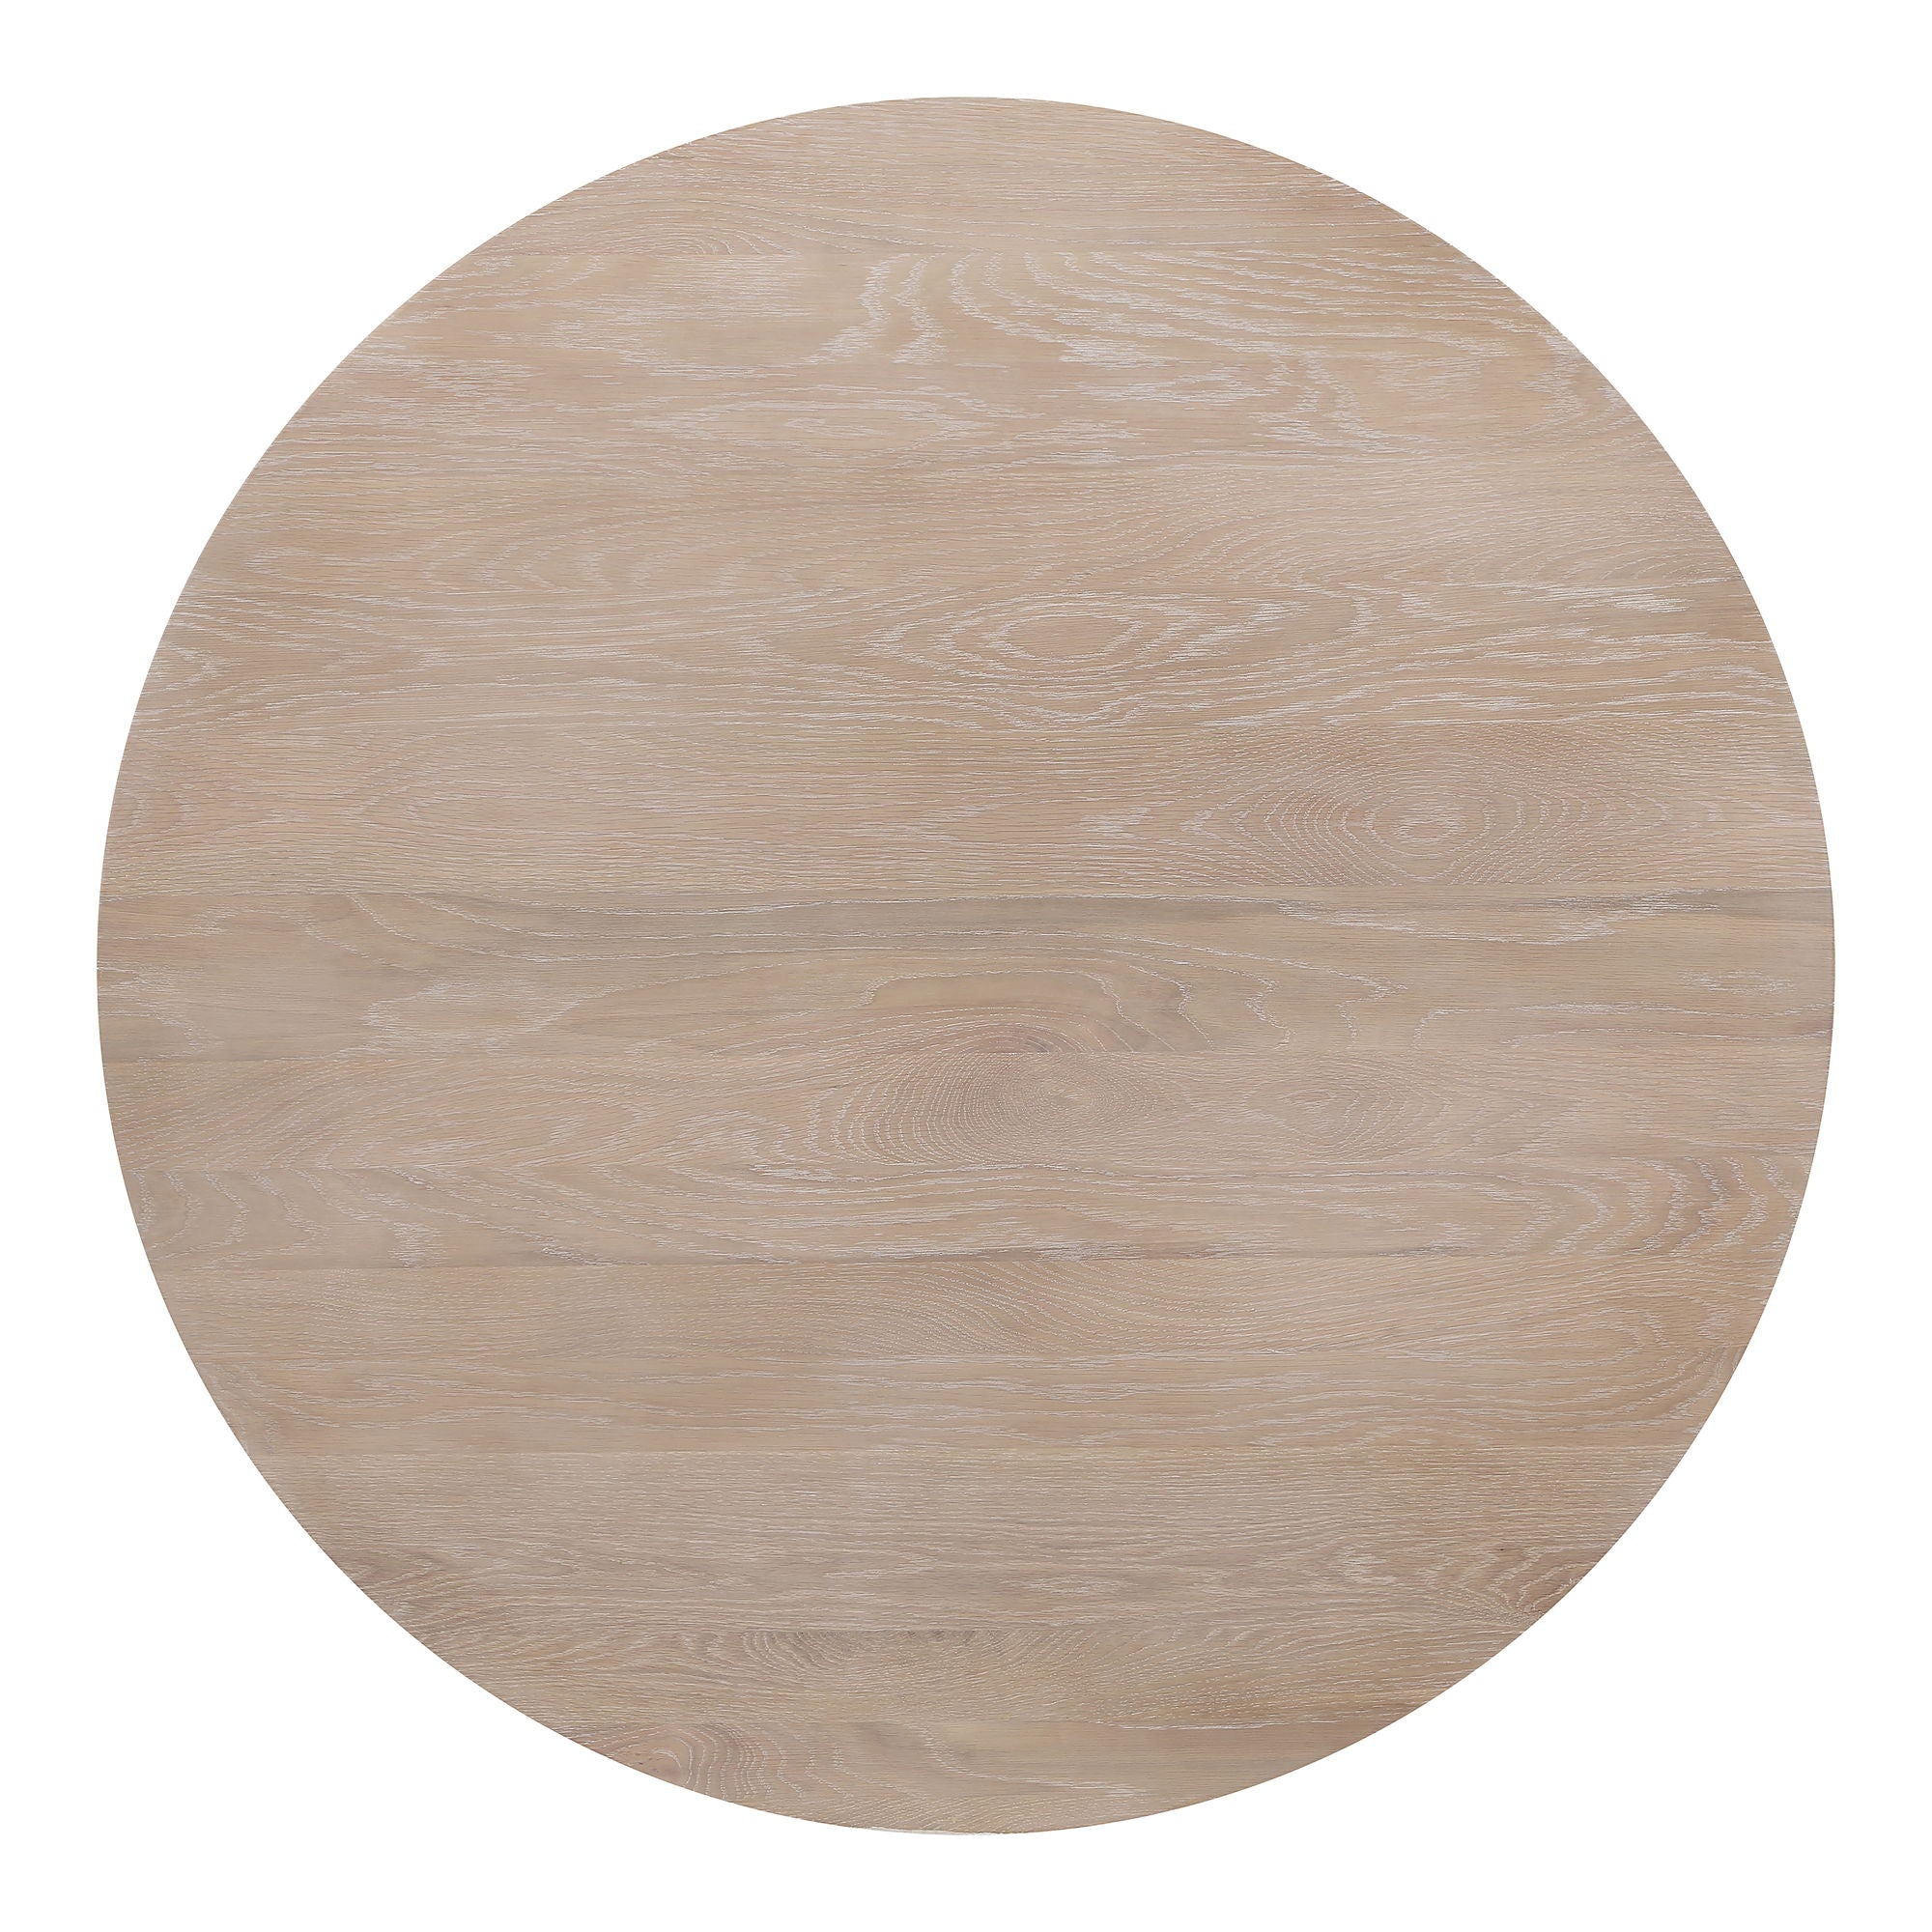 Silas - Round Dining Table - White Wash